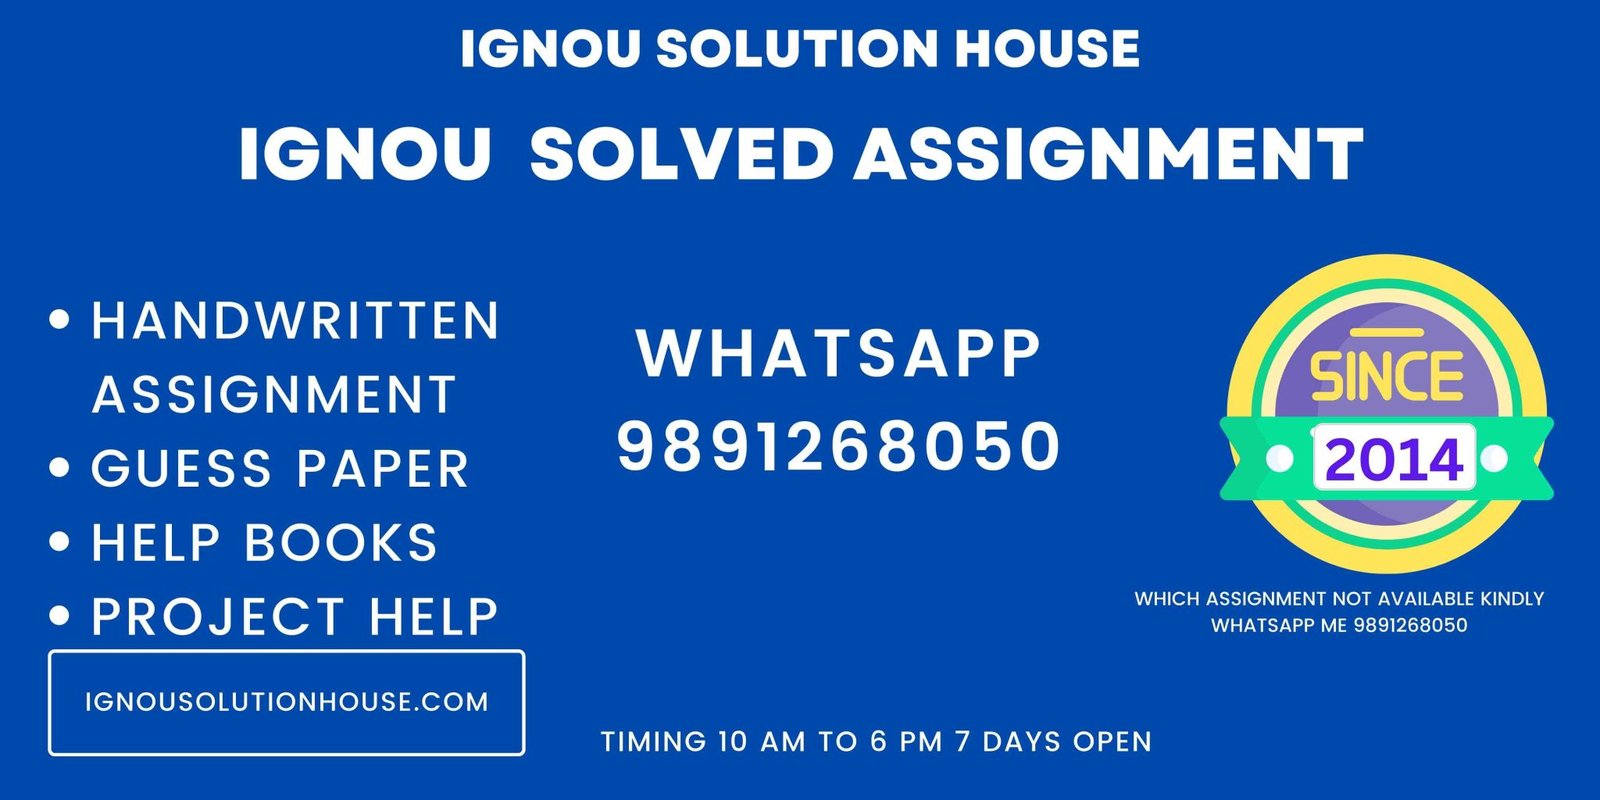 ignou assignment solutions free